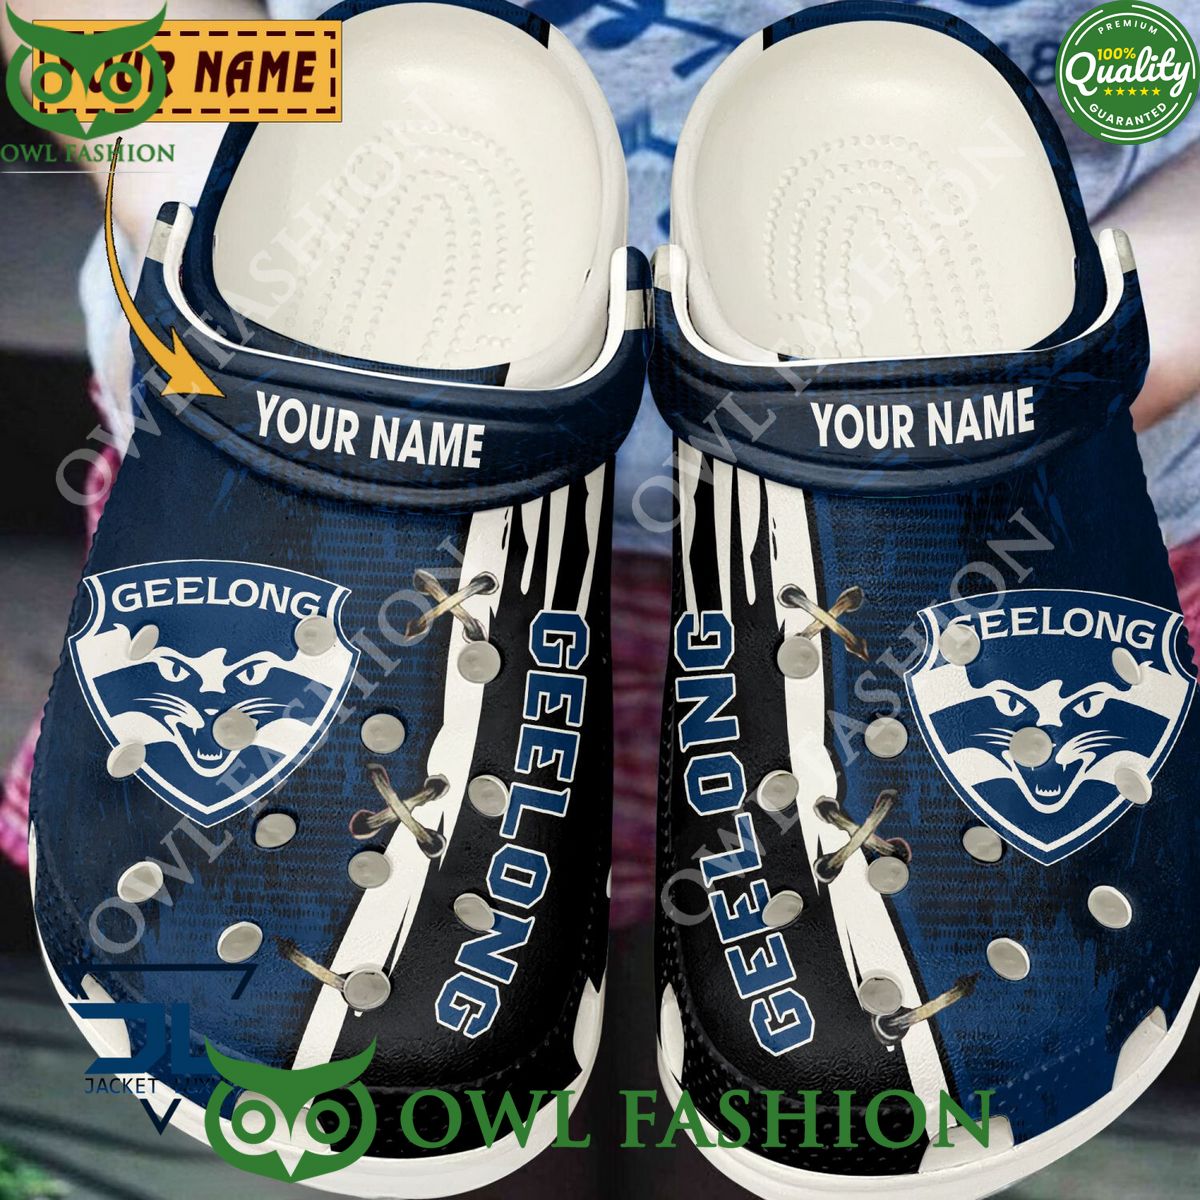 Geelong Football Club New Personalized Crocs